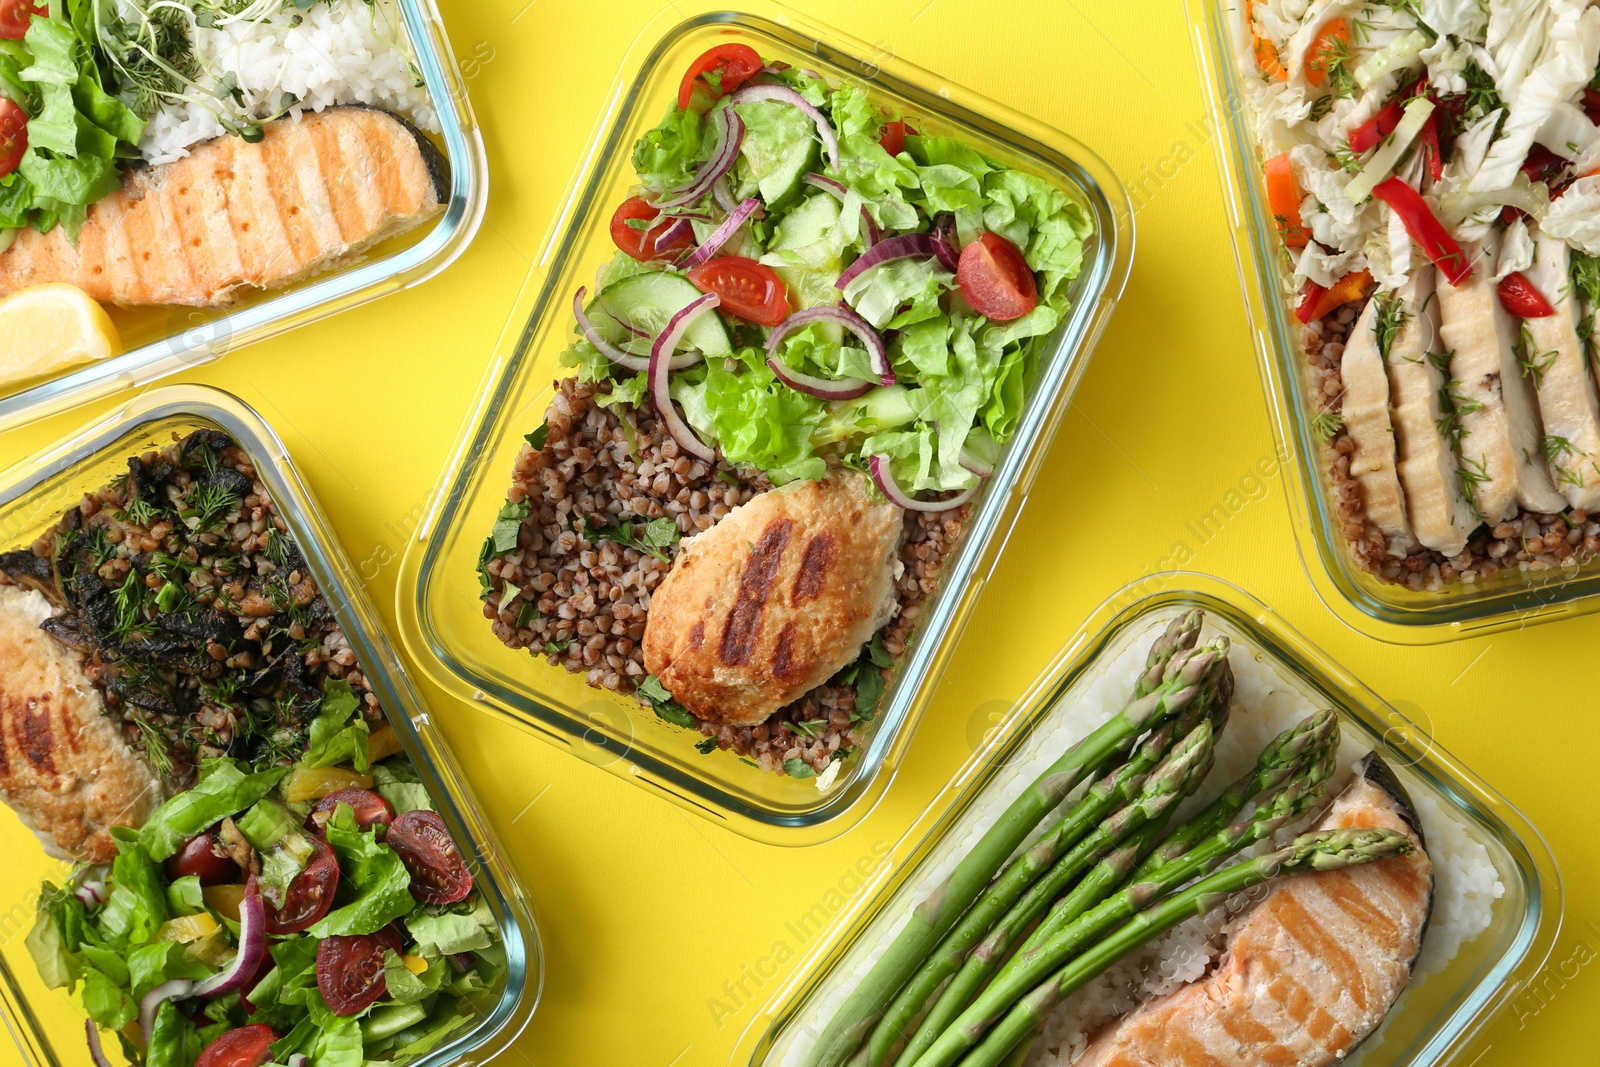 Photo of Healthy food. Different meals in glass containers on yellow background, flat lay